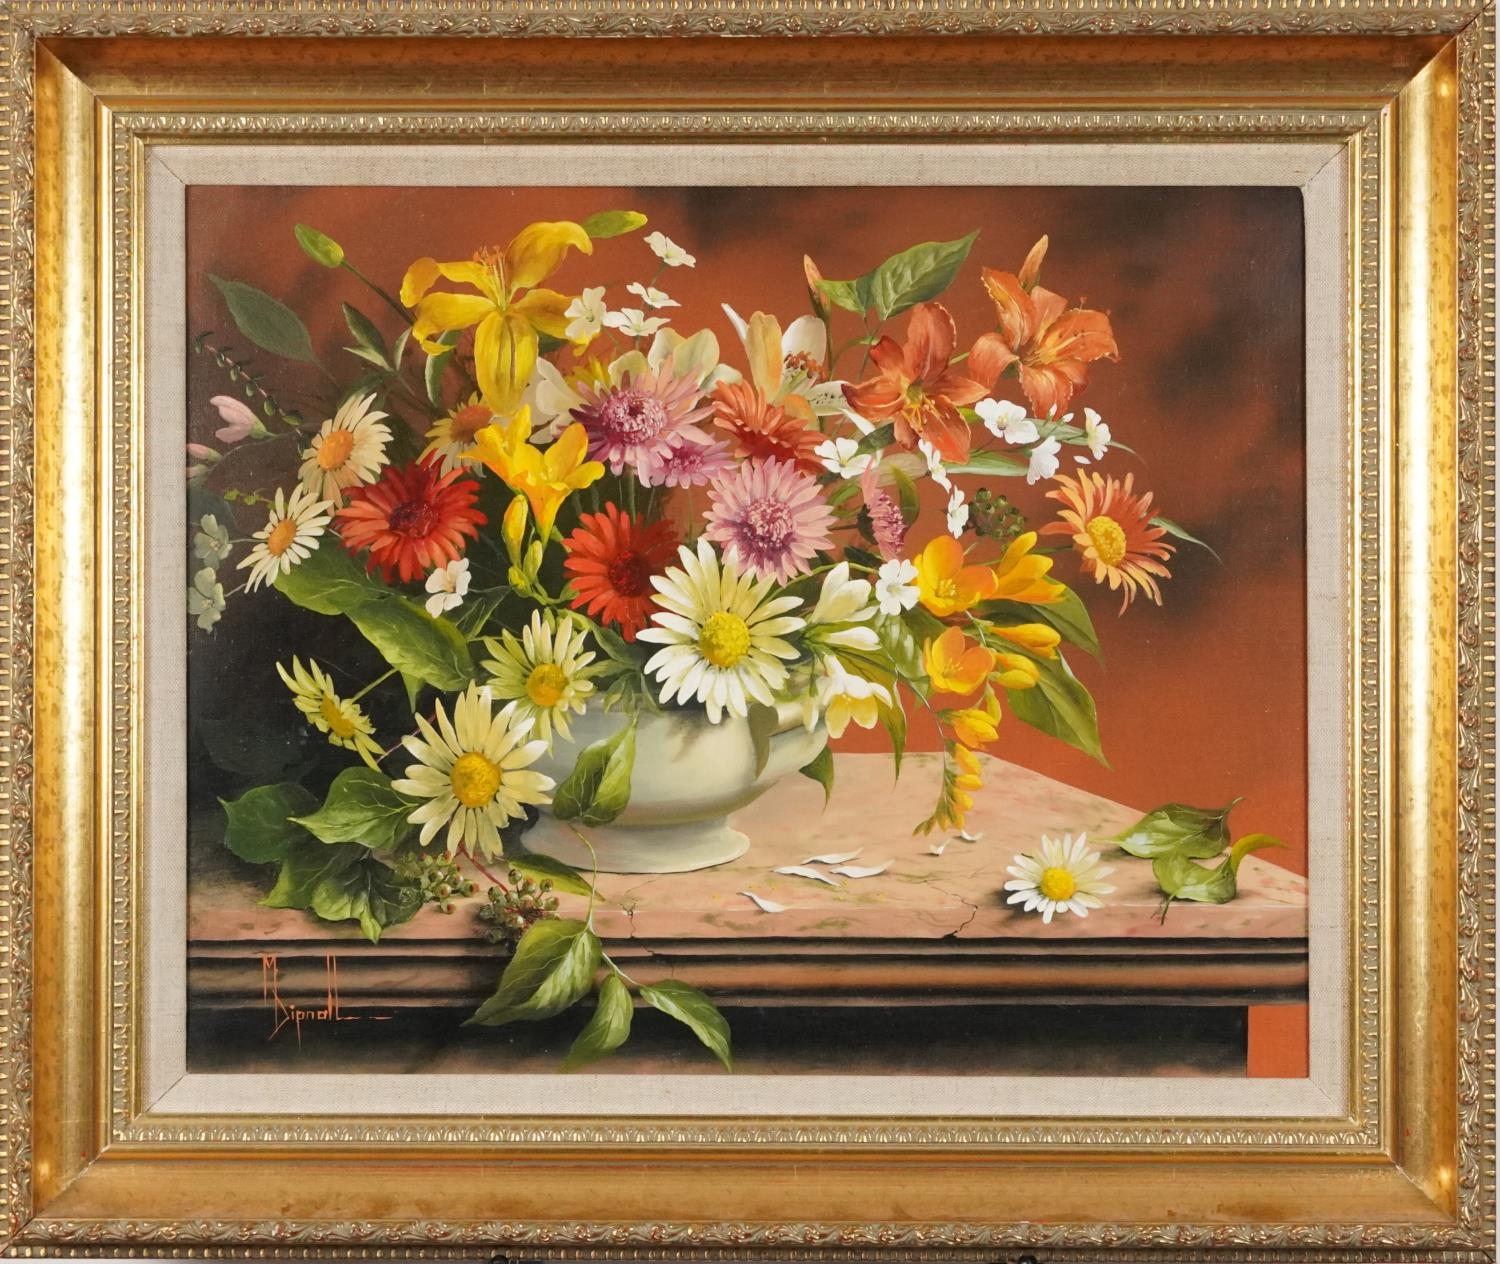 Mary Dipnall - Still life flowers, contemporary oil on canvas, mounted and framed, 49cm x 39cm - Image 2 of 4